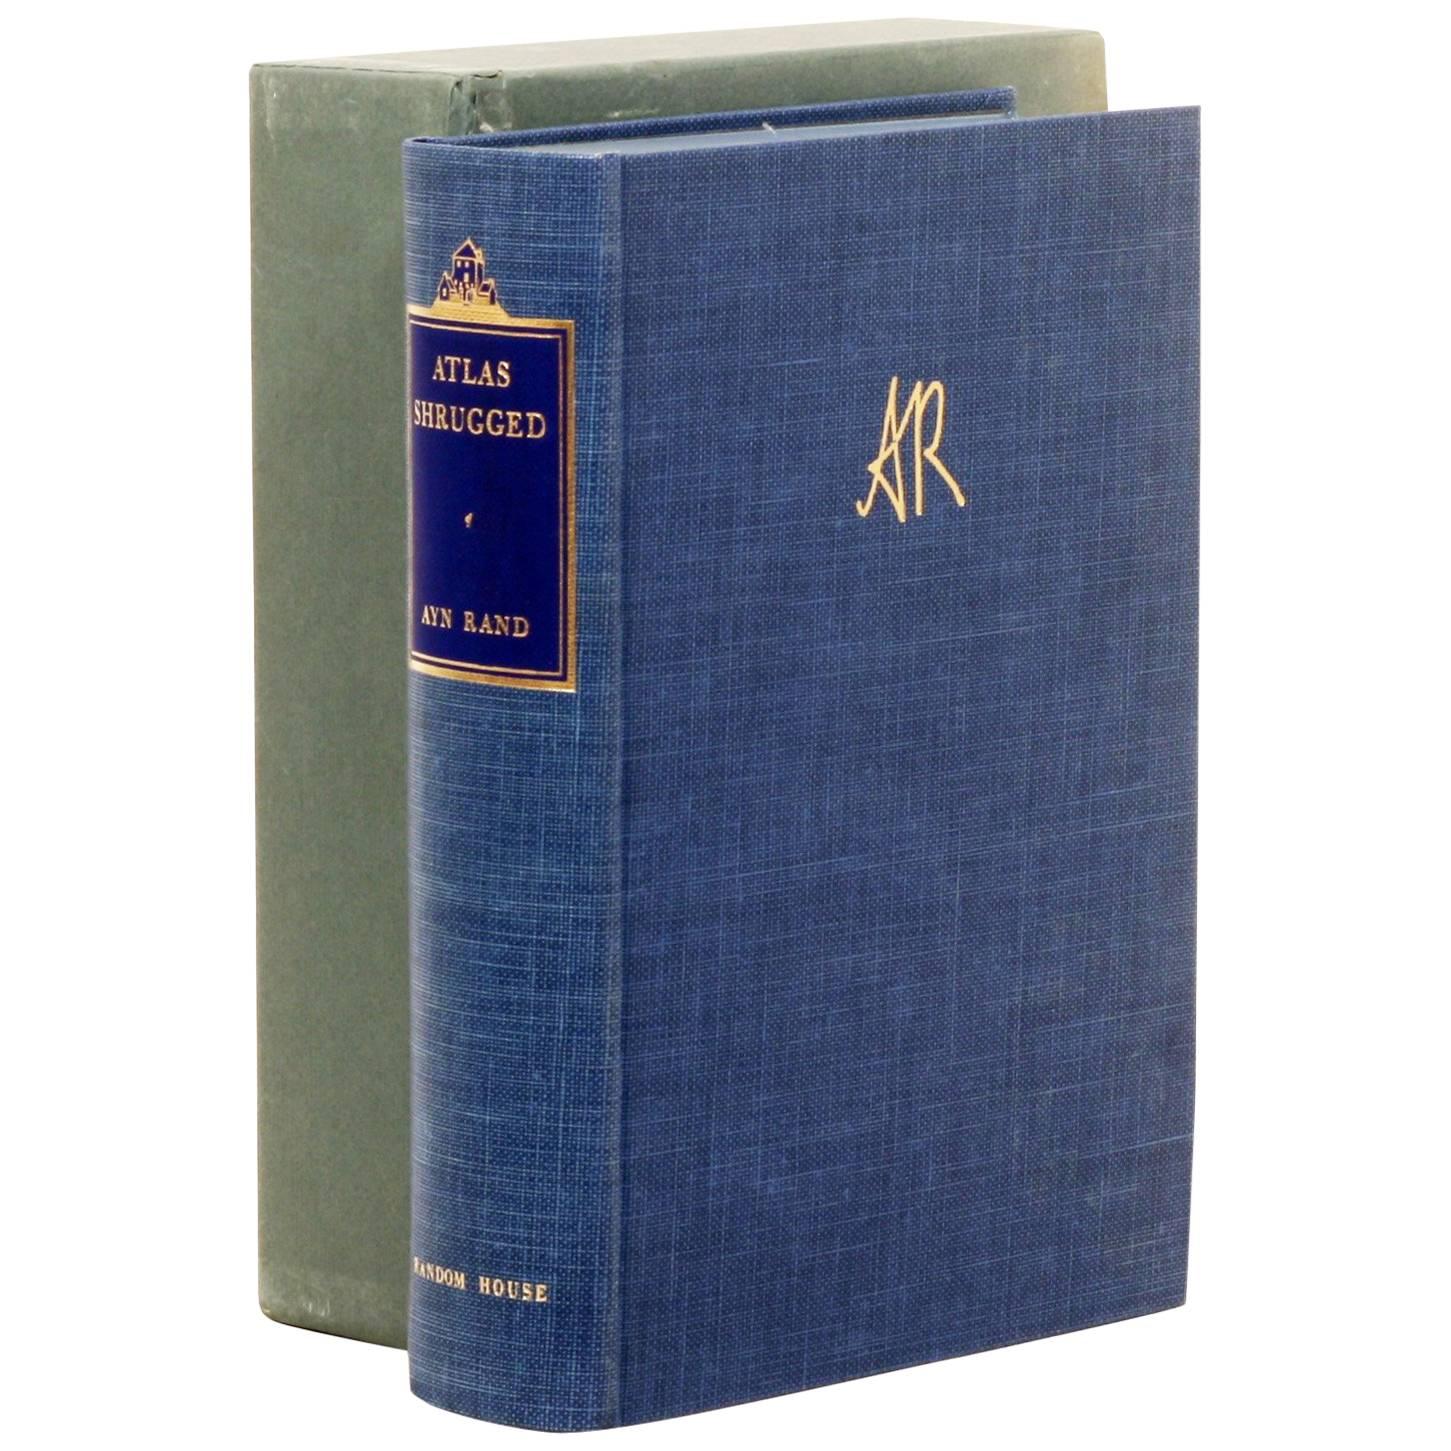 Signed Limited Edition of Ayn Rand's Atlas Shrugged